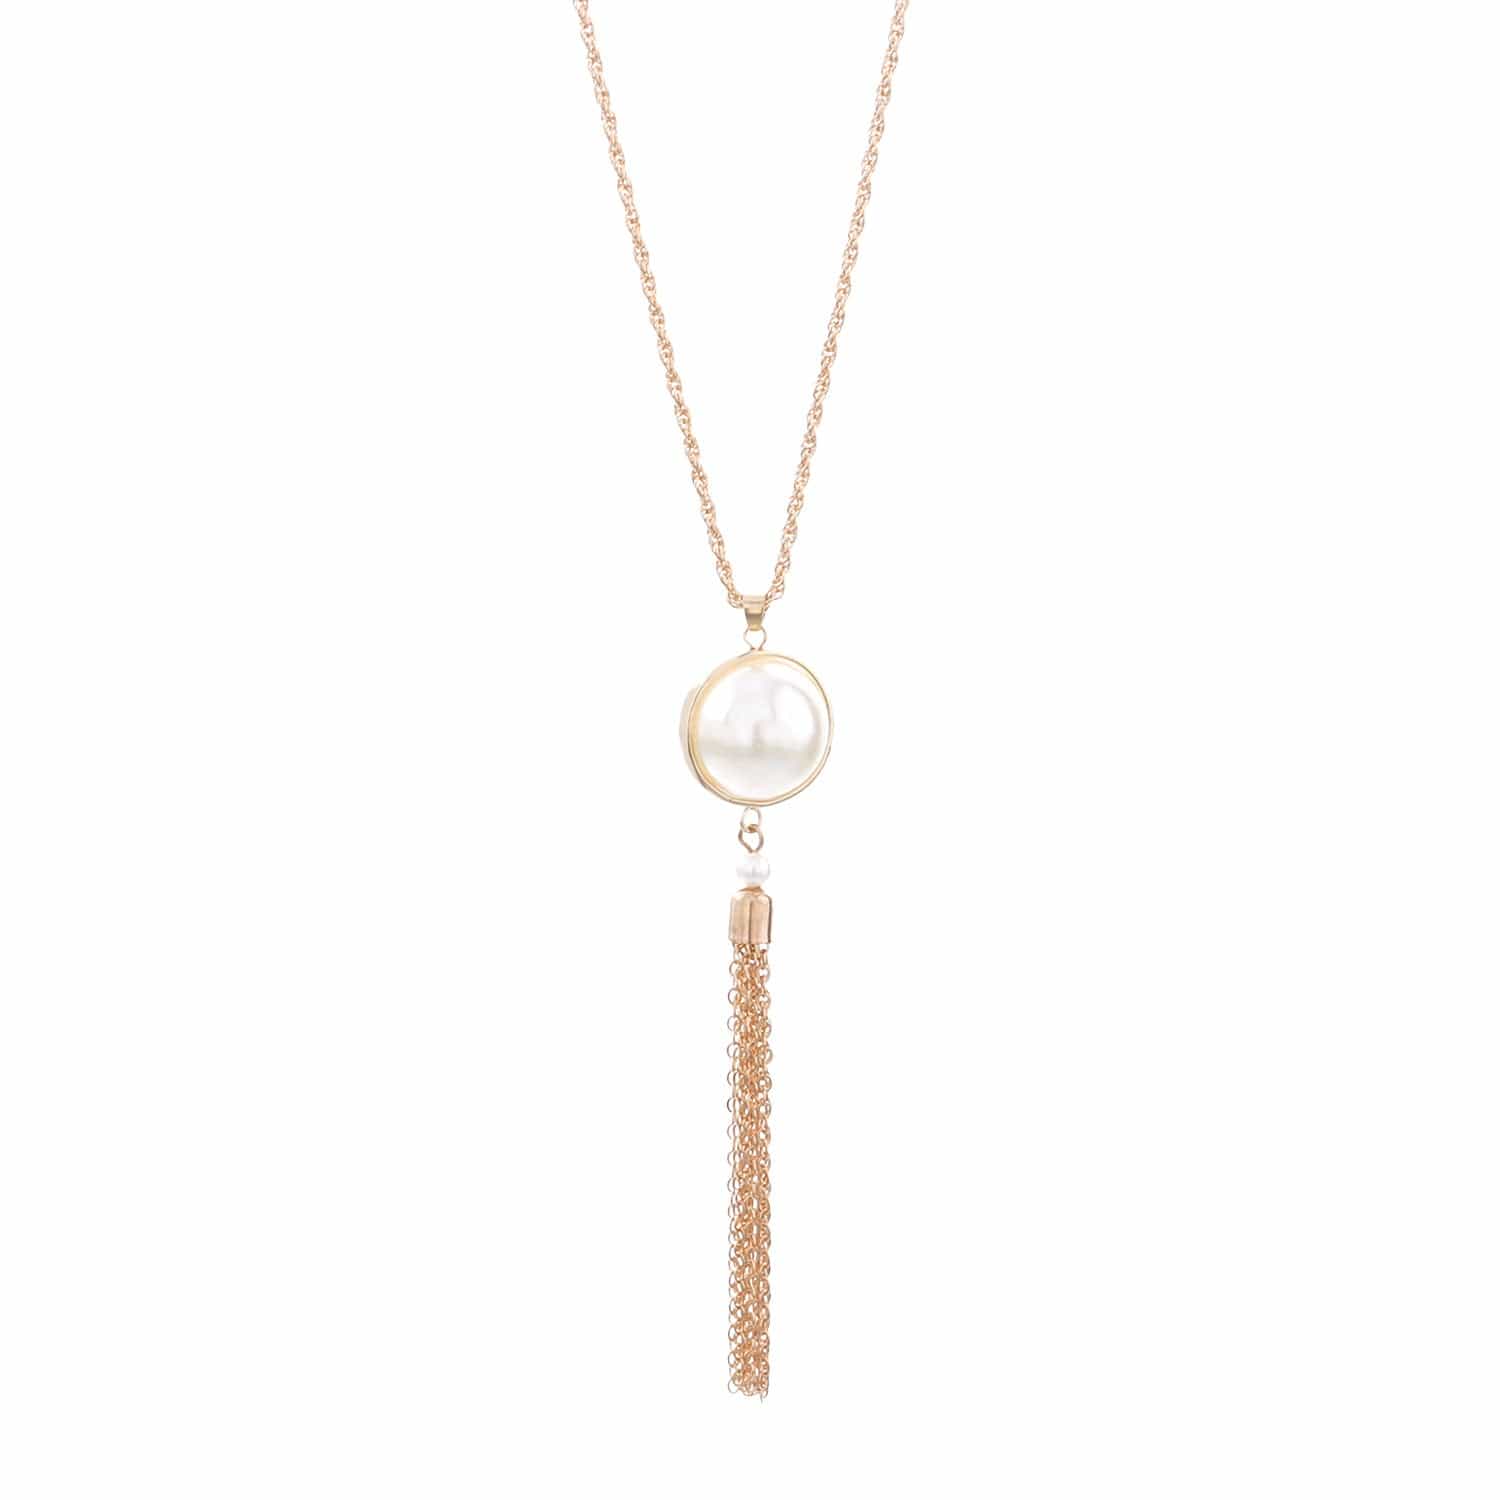 JuJumoose Simple knotted tassel long sweater necklace